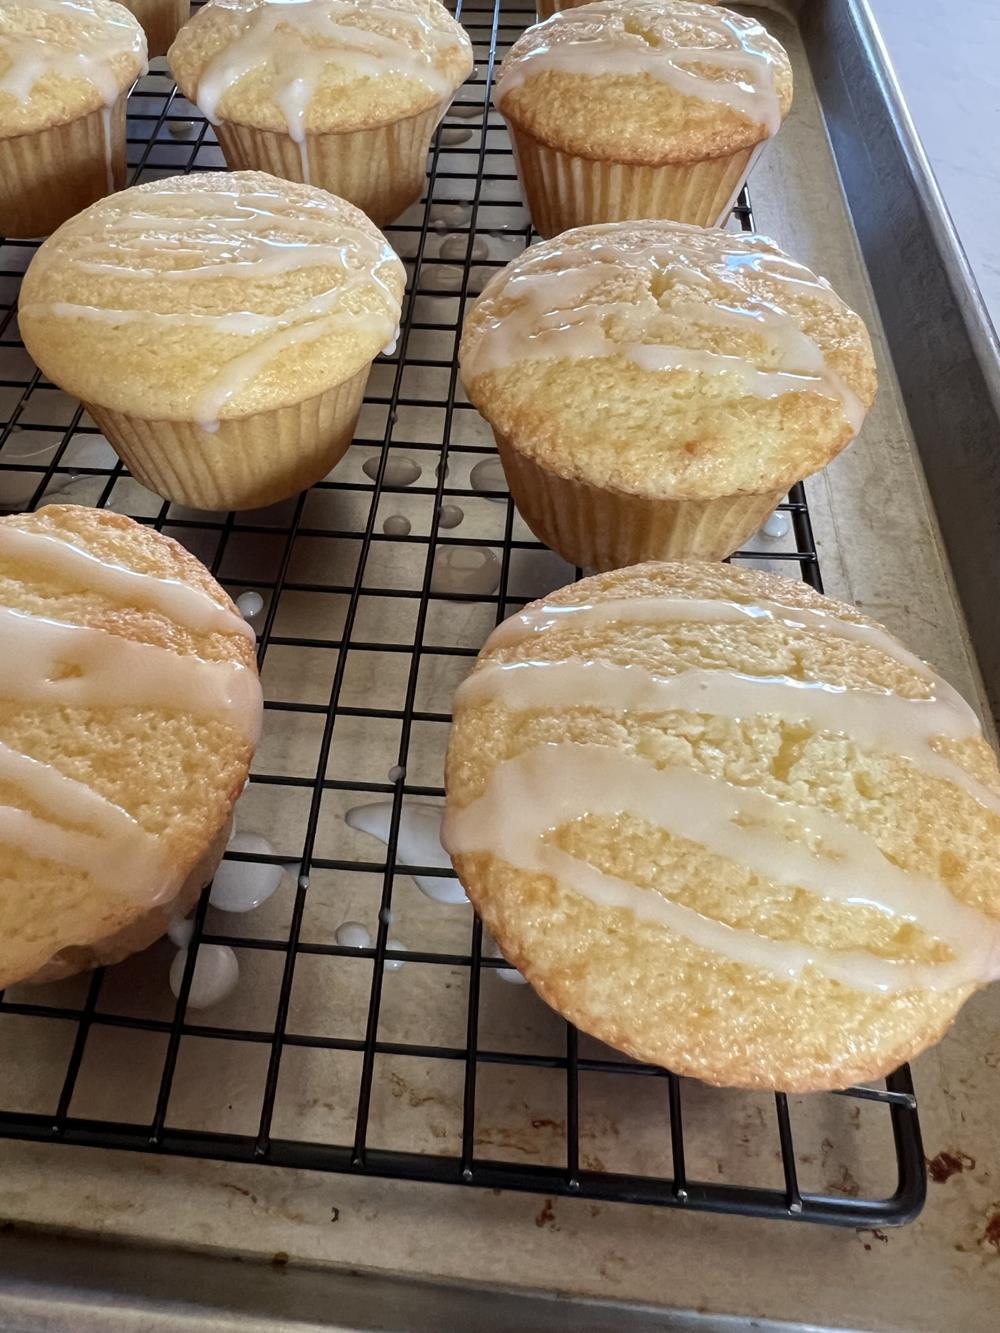 Gluten Free Lemon Muffins with glaze on cooling rack